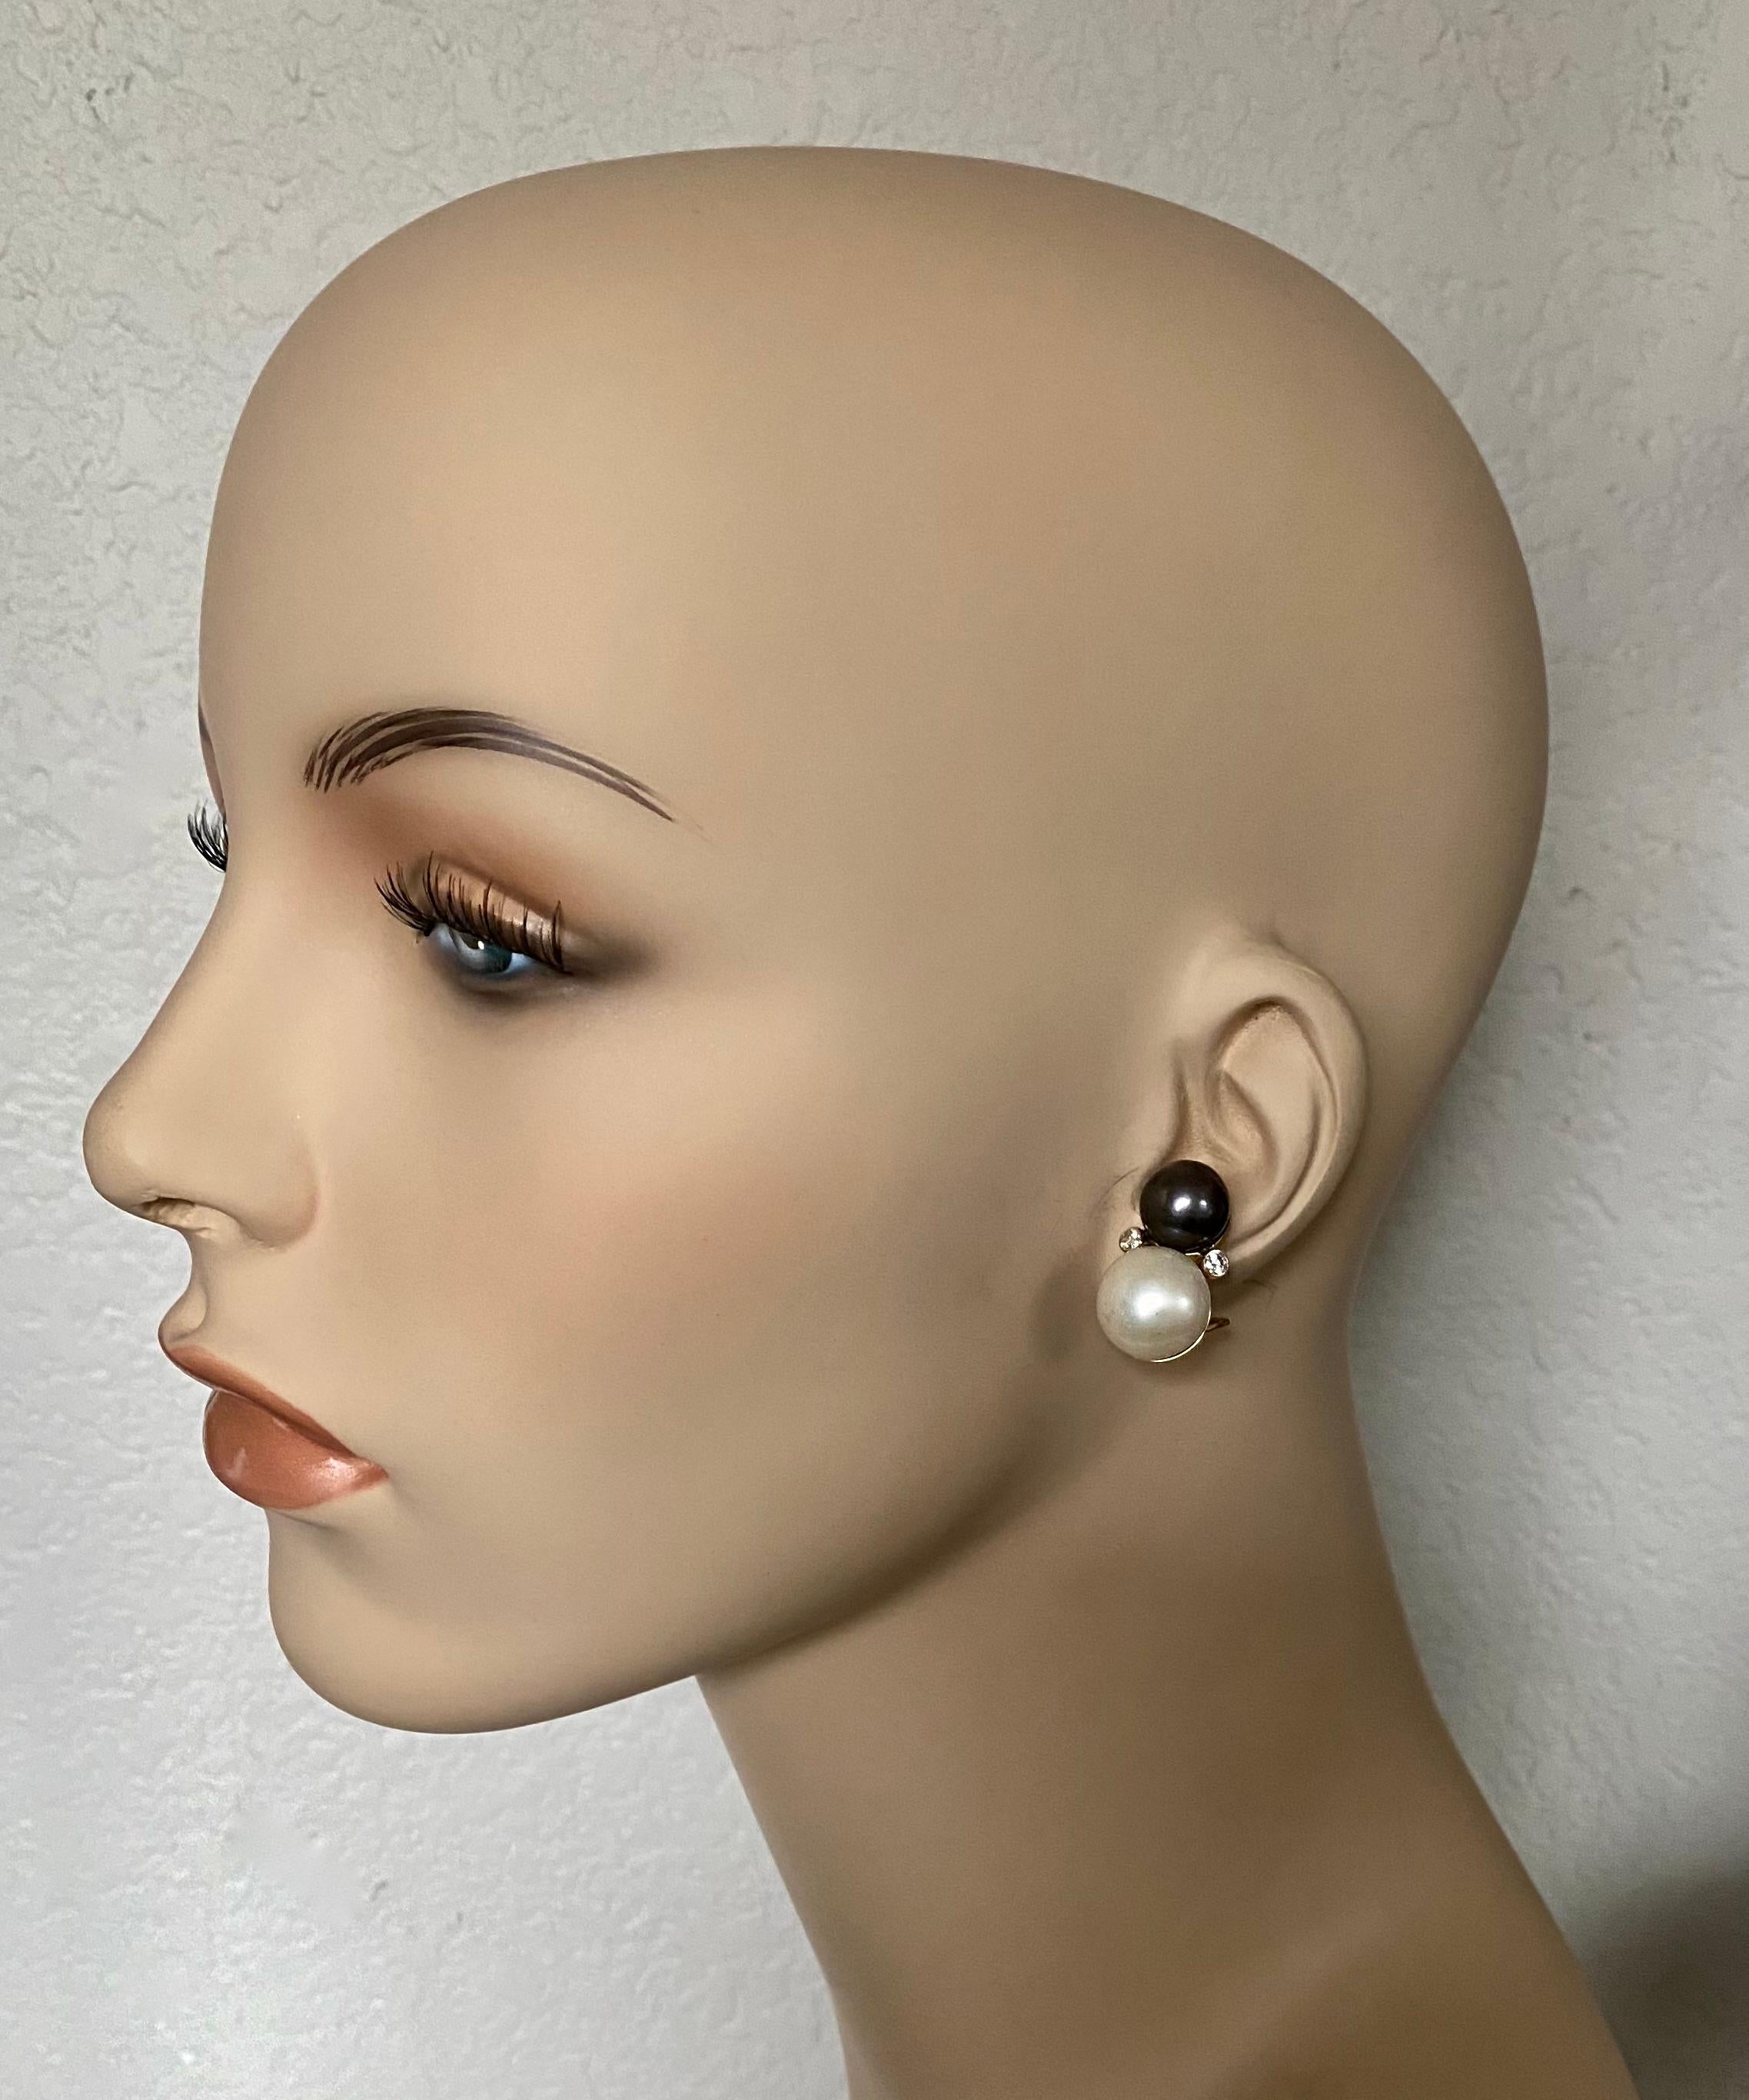 Black and white pearls characterize these elegant button style earrings.  The 11mm Tahitian pearls are richly colored with great luster.  The 14mm South Seas button pearls are pure white in color with blemish free surfaces.  Complimenting the pearls